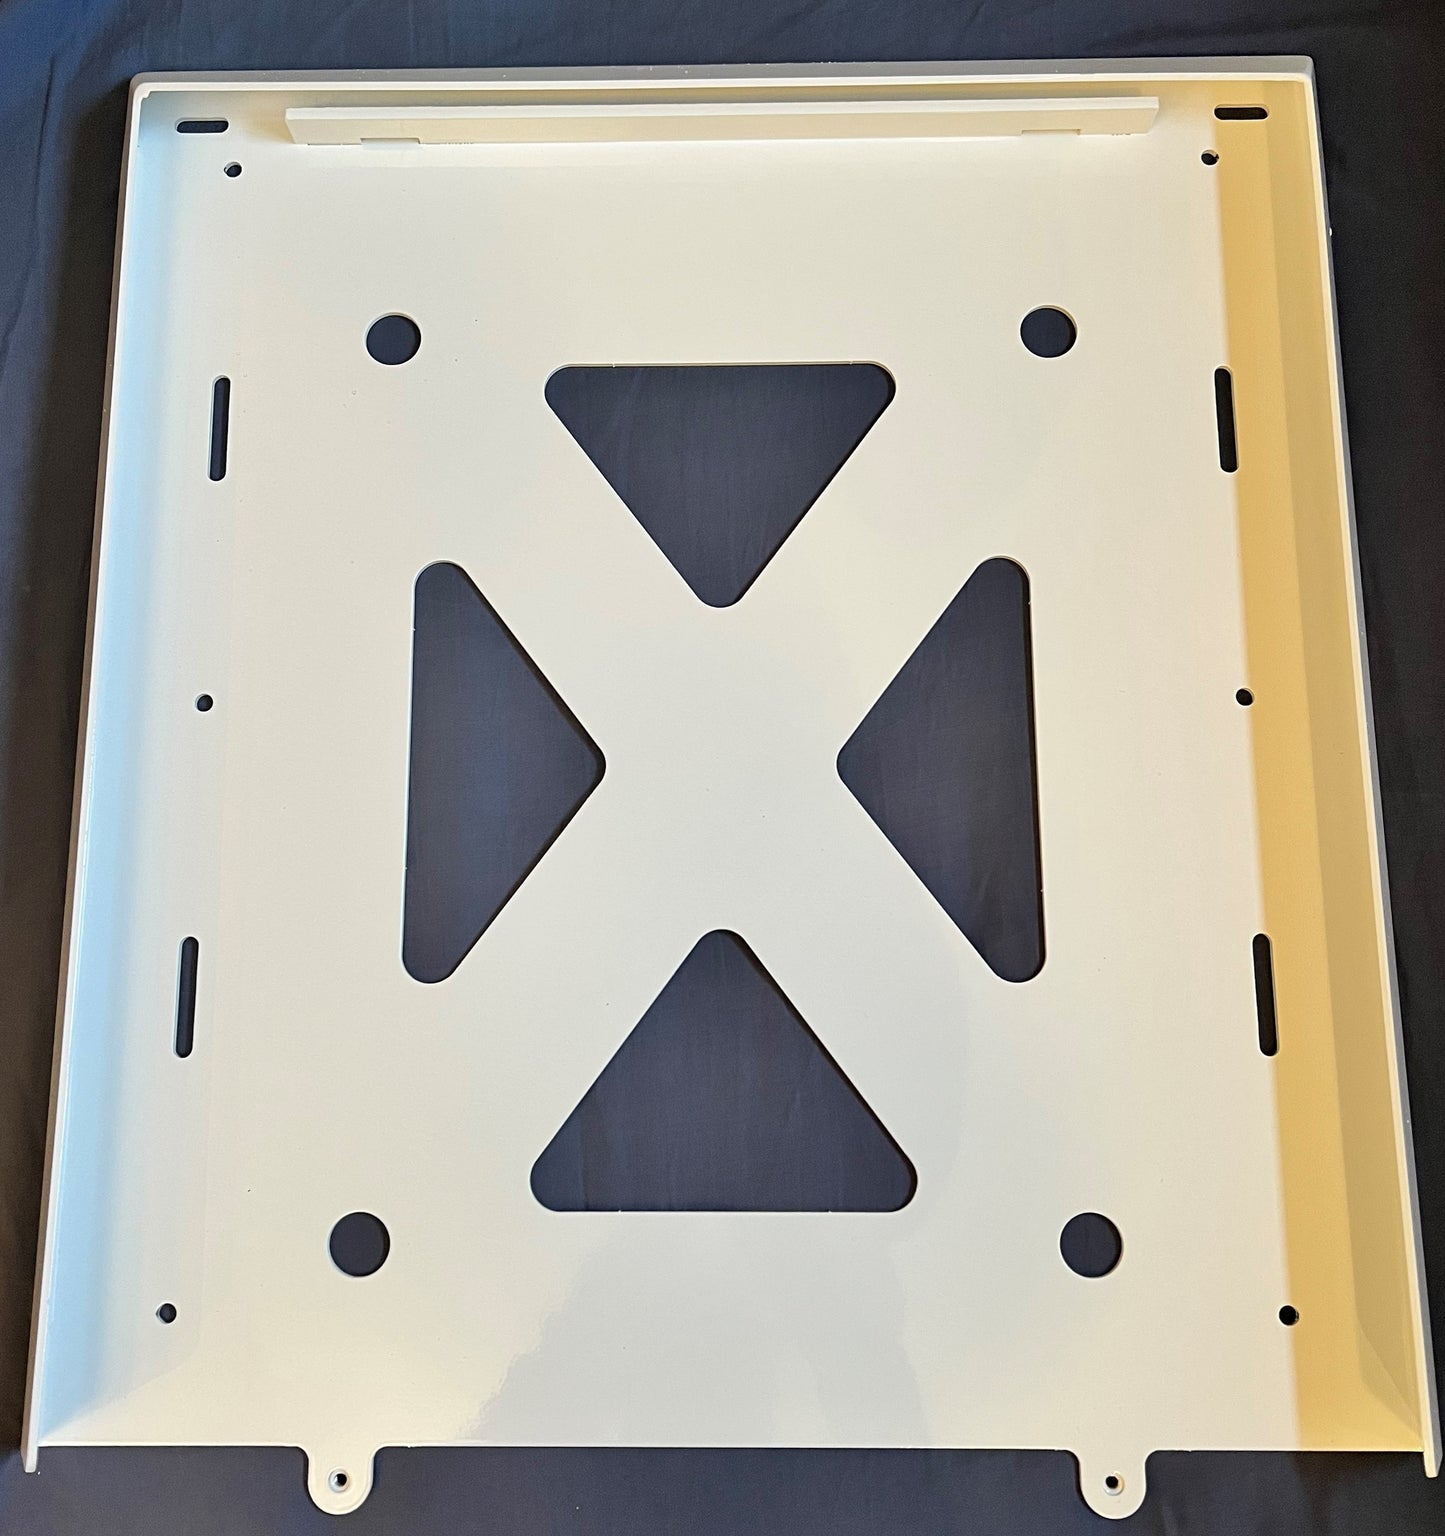 Extra Base Plate for Quick Release Mount for Starlink High Performance In-Motion Dish